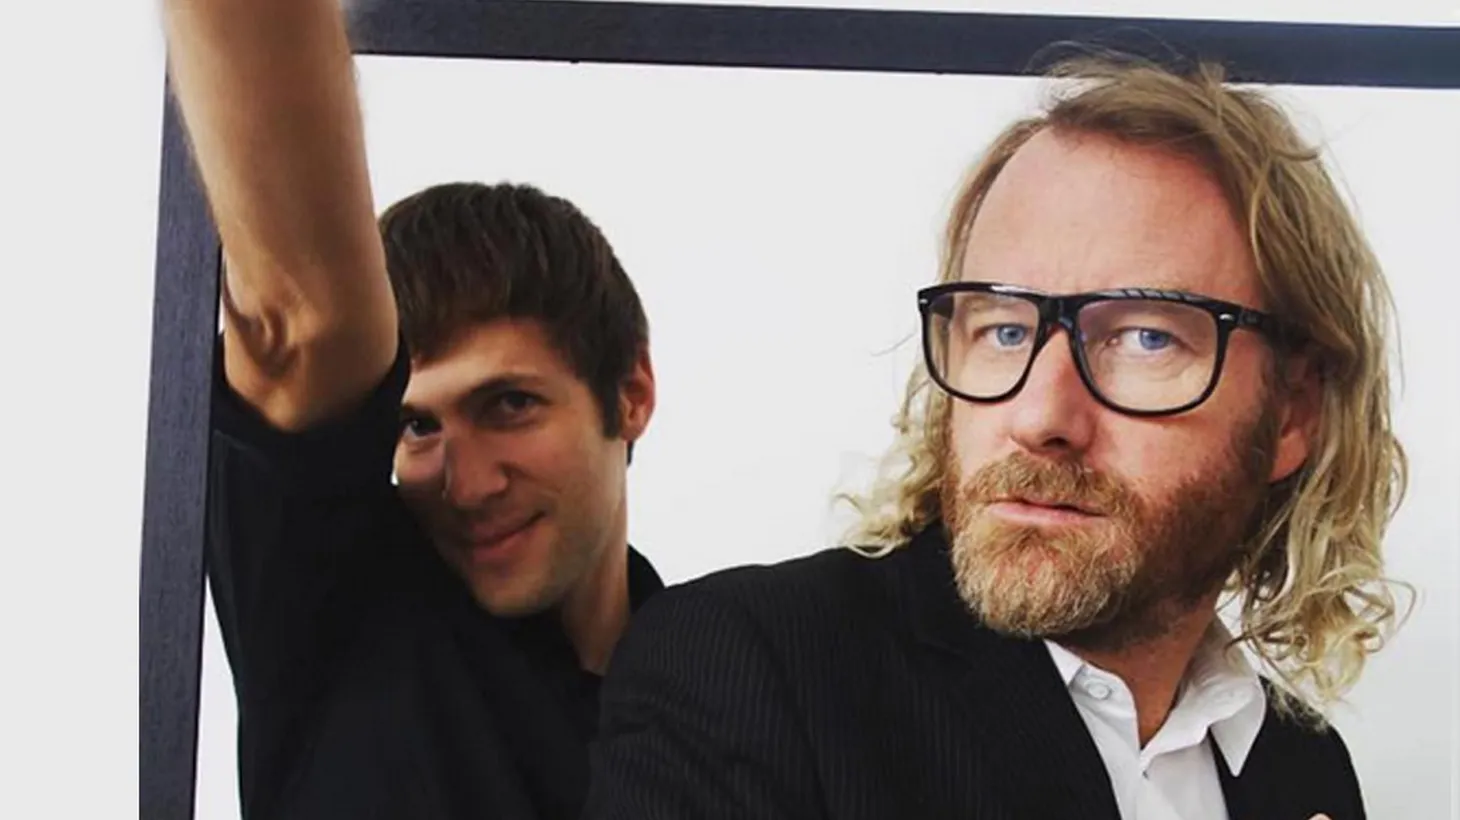 EL VY is a new project from The National front-man Matt Berninger and Brent Knopf (Ramona Falls/ Menomena).